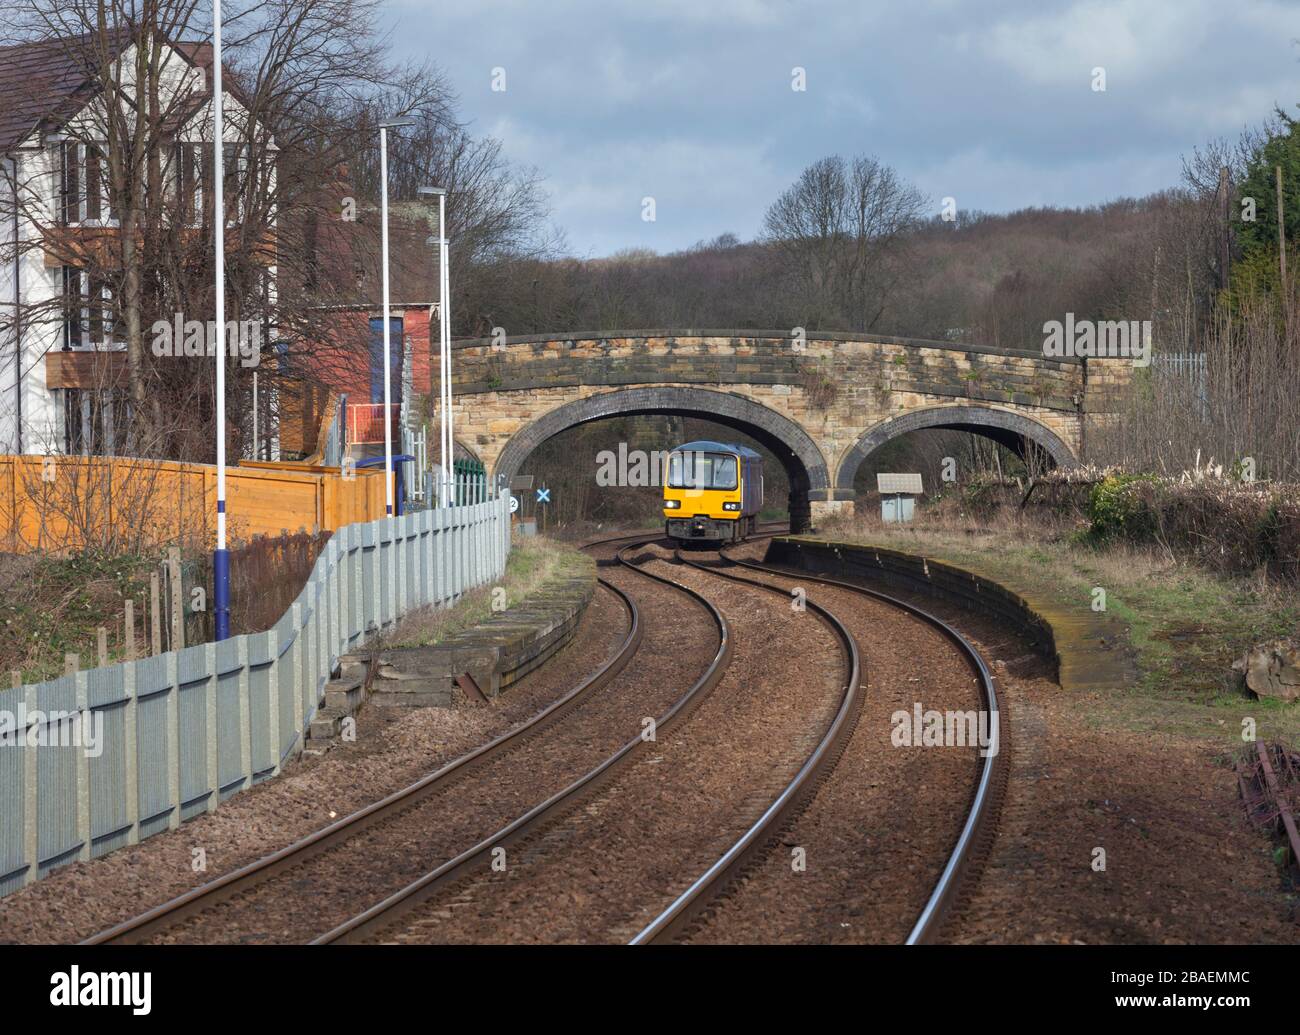 Northern Rail class 144 pacer train 144013 arriving at Chapeltown (south Yorkshire) Stock Photo